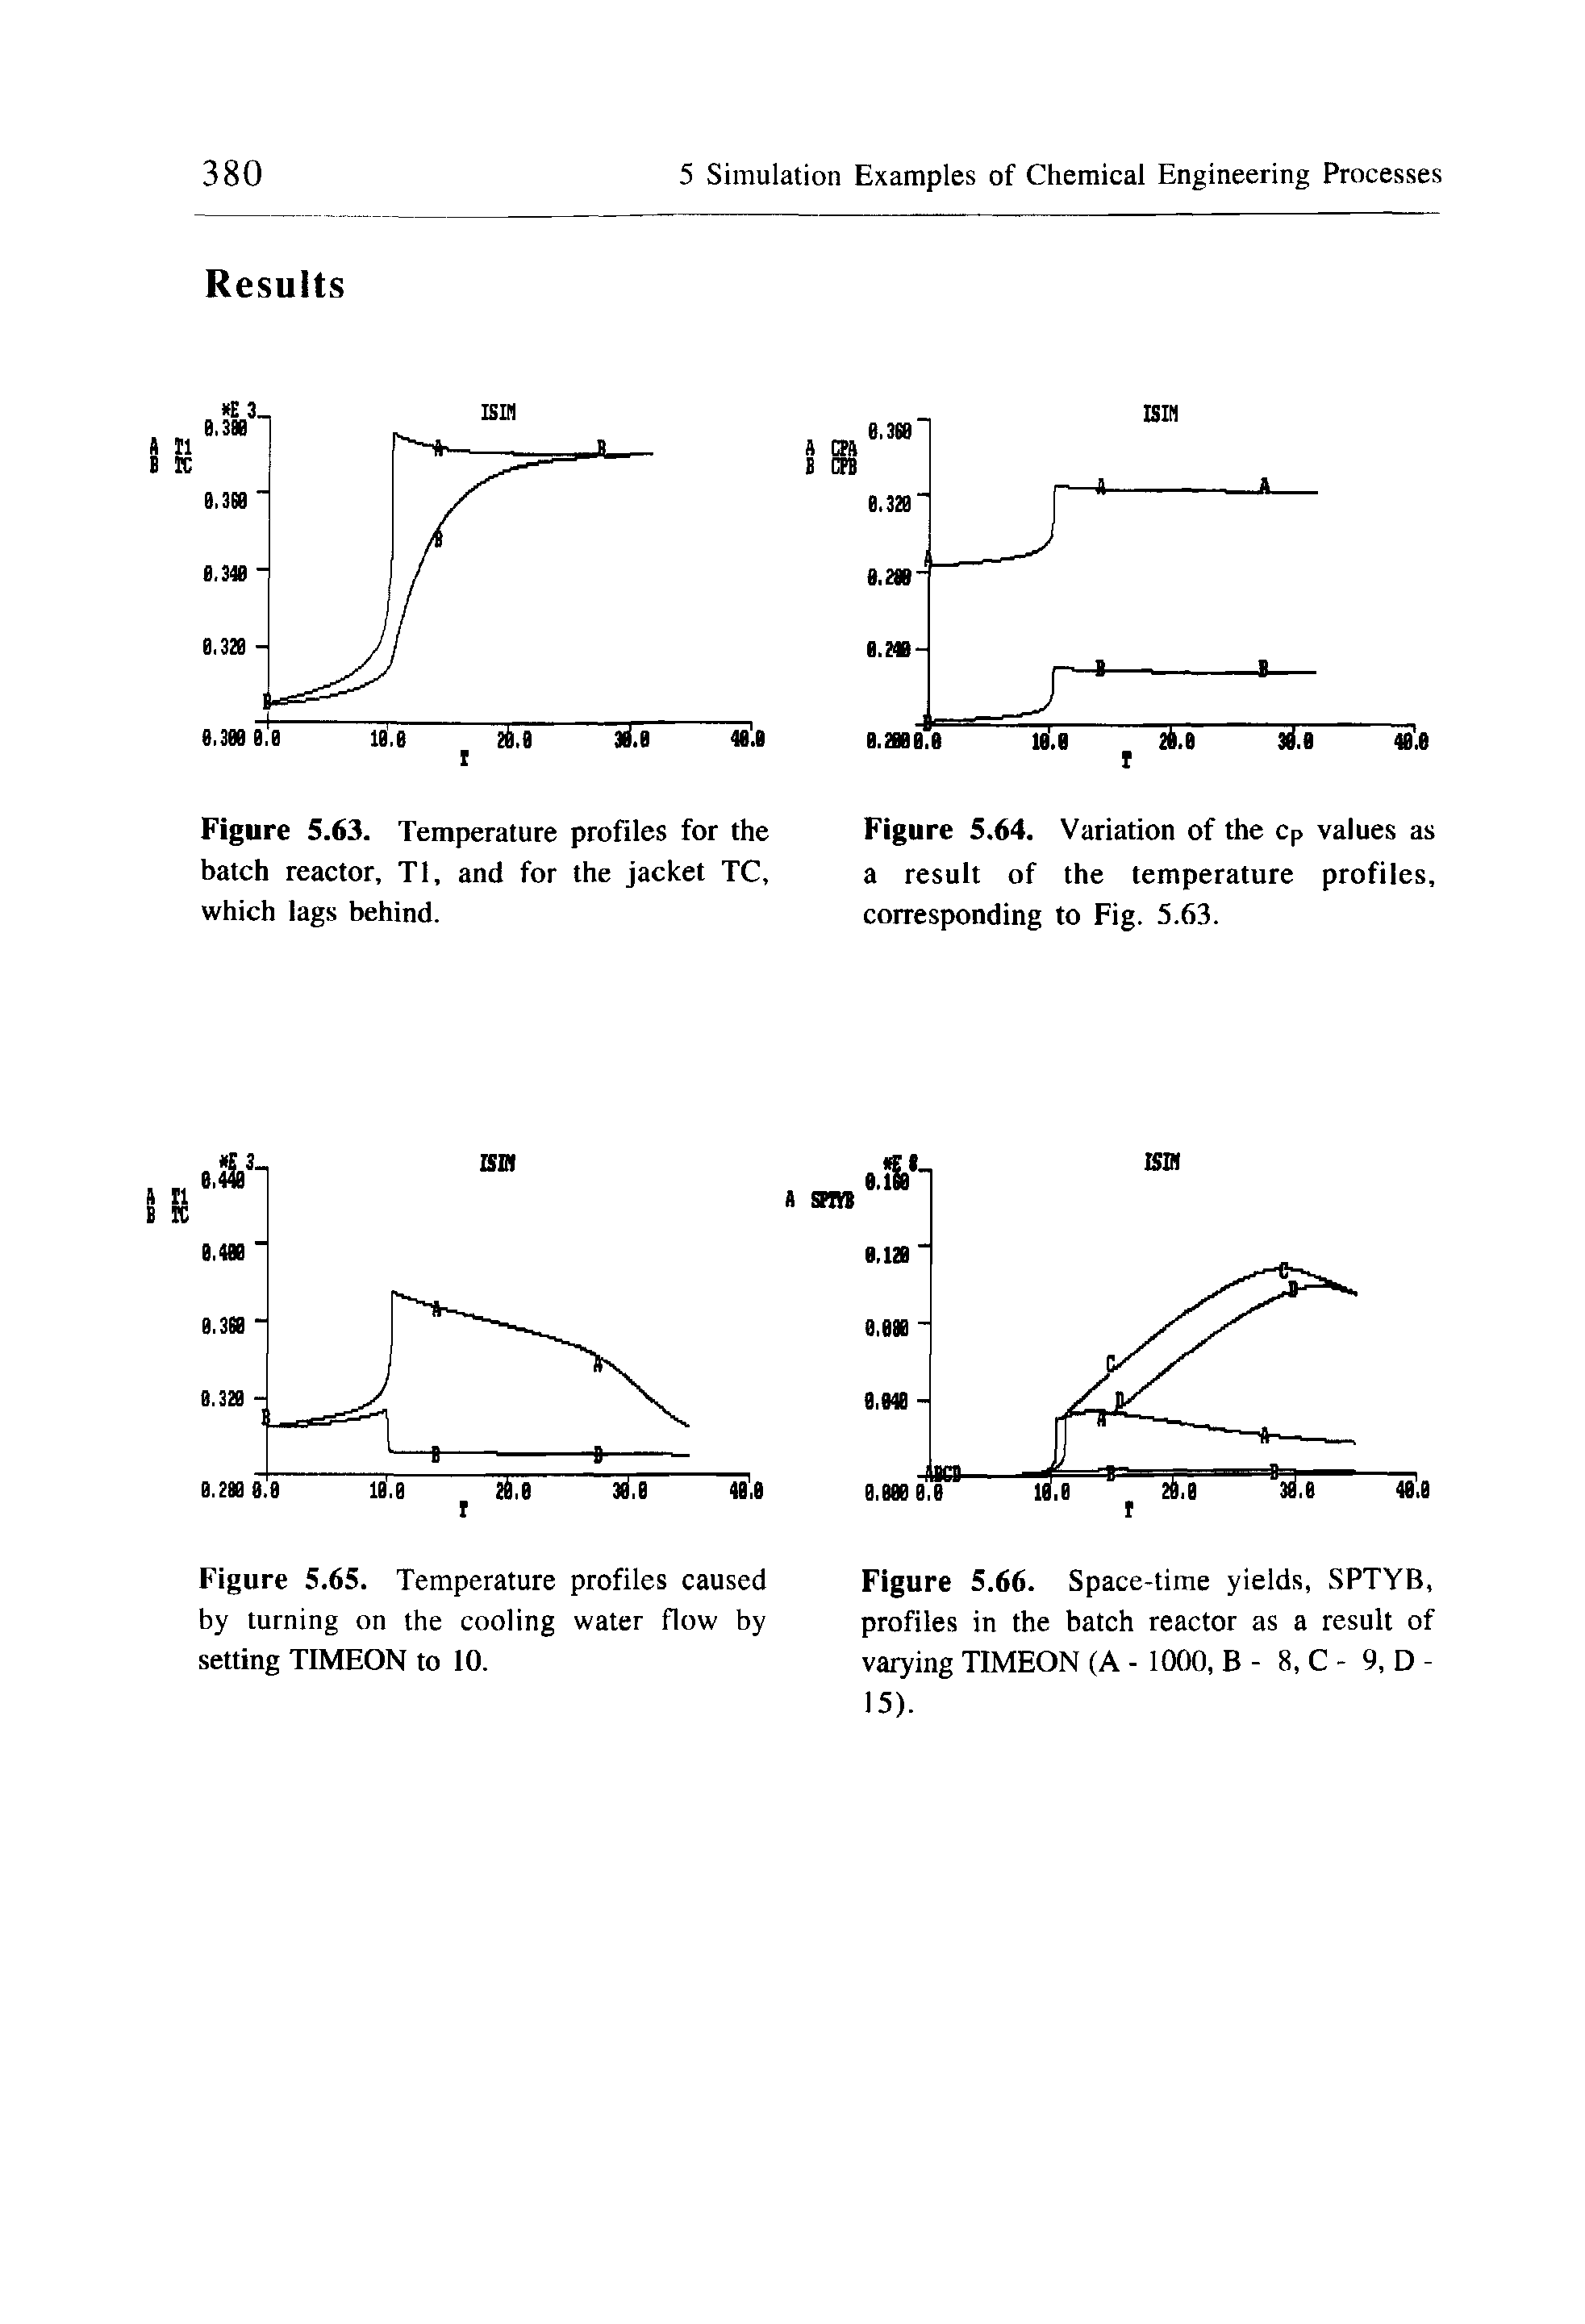 Figure 5.66. Space-time yields, SPTYB, profiles in the batch reactor as a result of varying TIMEON (A - 1000, B - 8, C - 9, D -15).